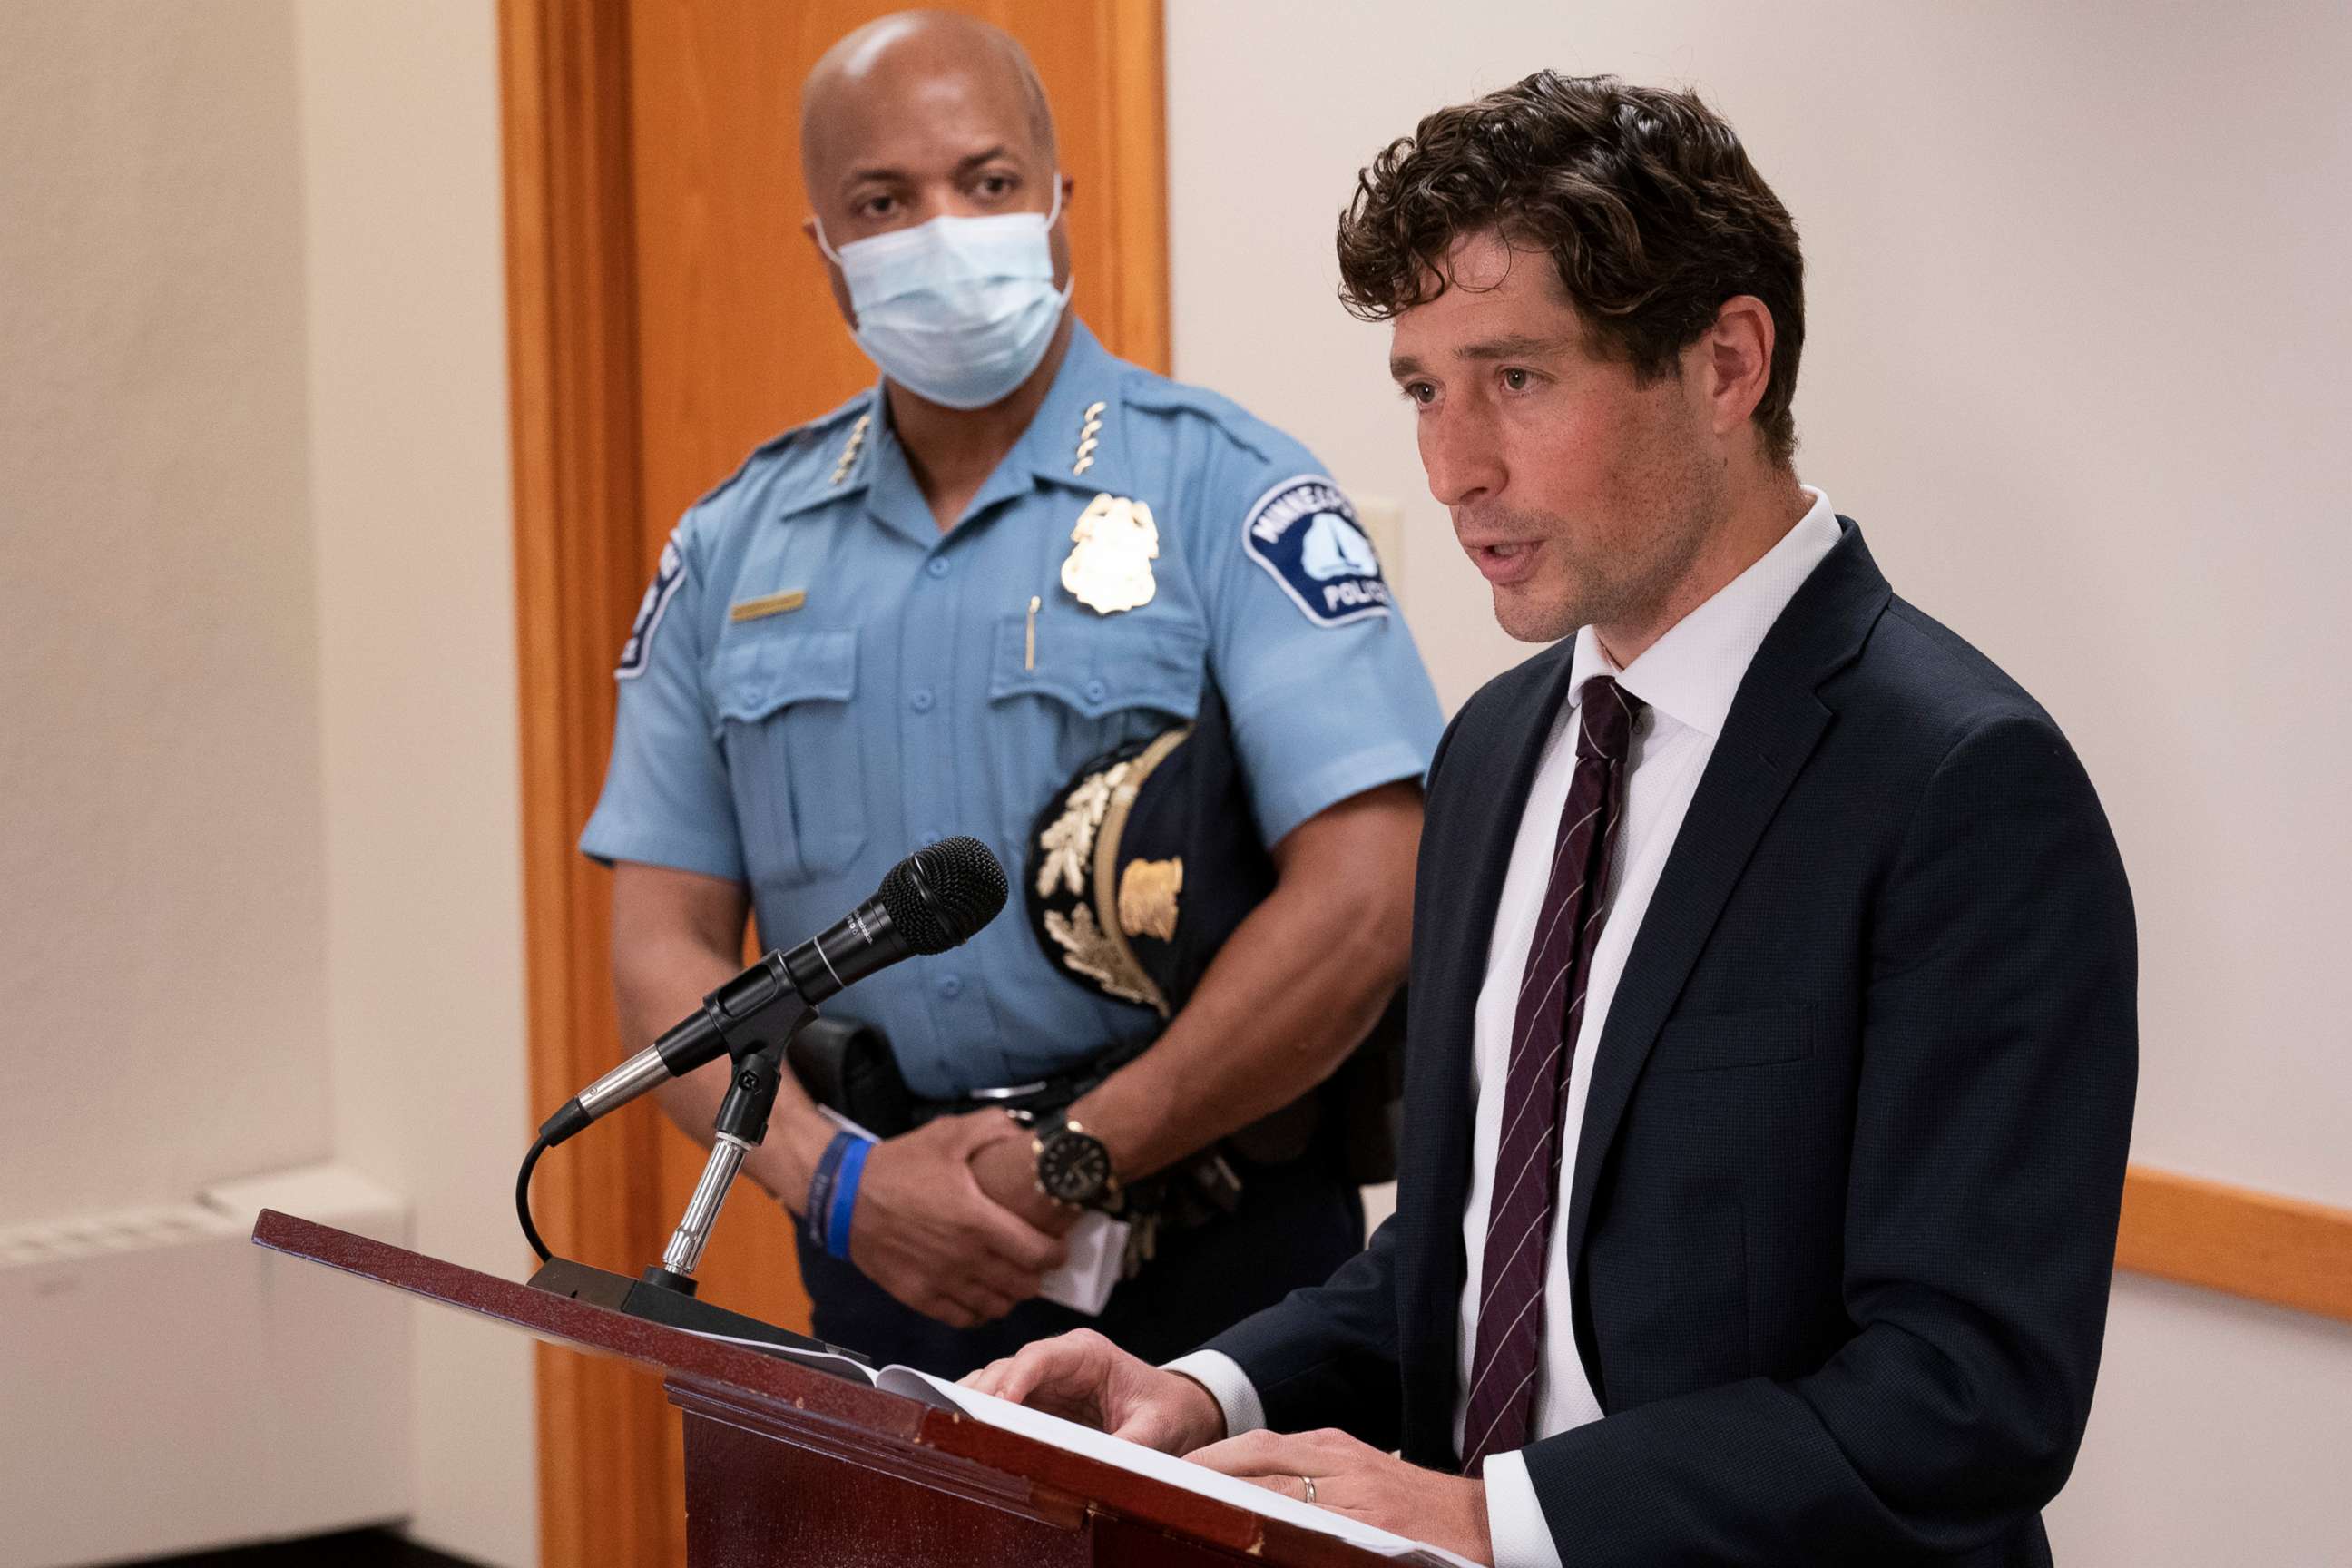 PHOTO: In this Aug. 26, 2020, file photo, Minneapolis Mayor Jacob Frey speaks at a news conference as Police Chief Medaria Arradondo listens, in Minneapolis.